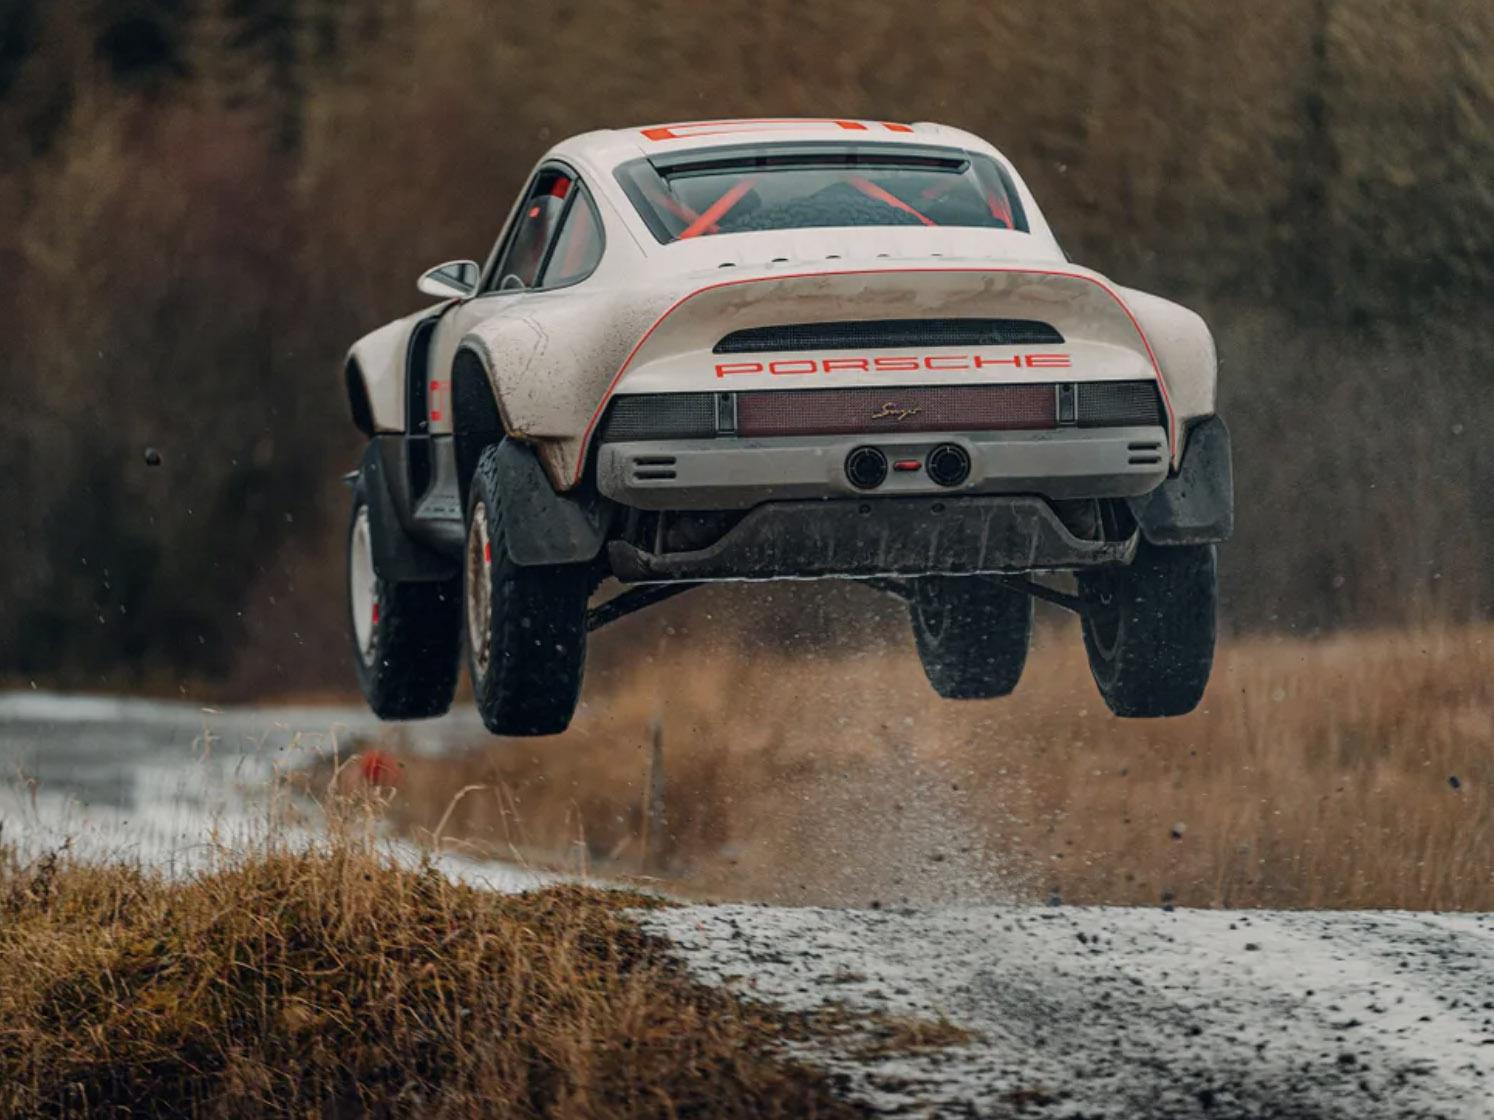 Singer has reimagined the capabilities of a 1990 Porsche 911, turning it into a rally special.